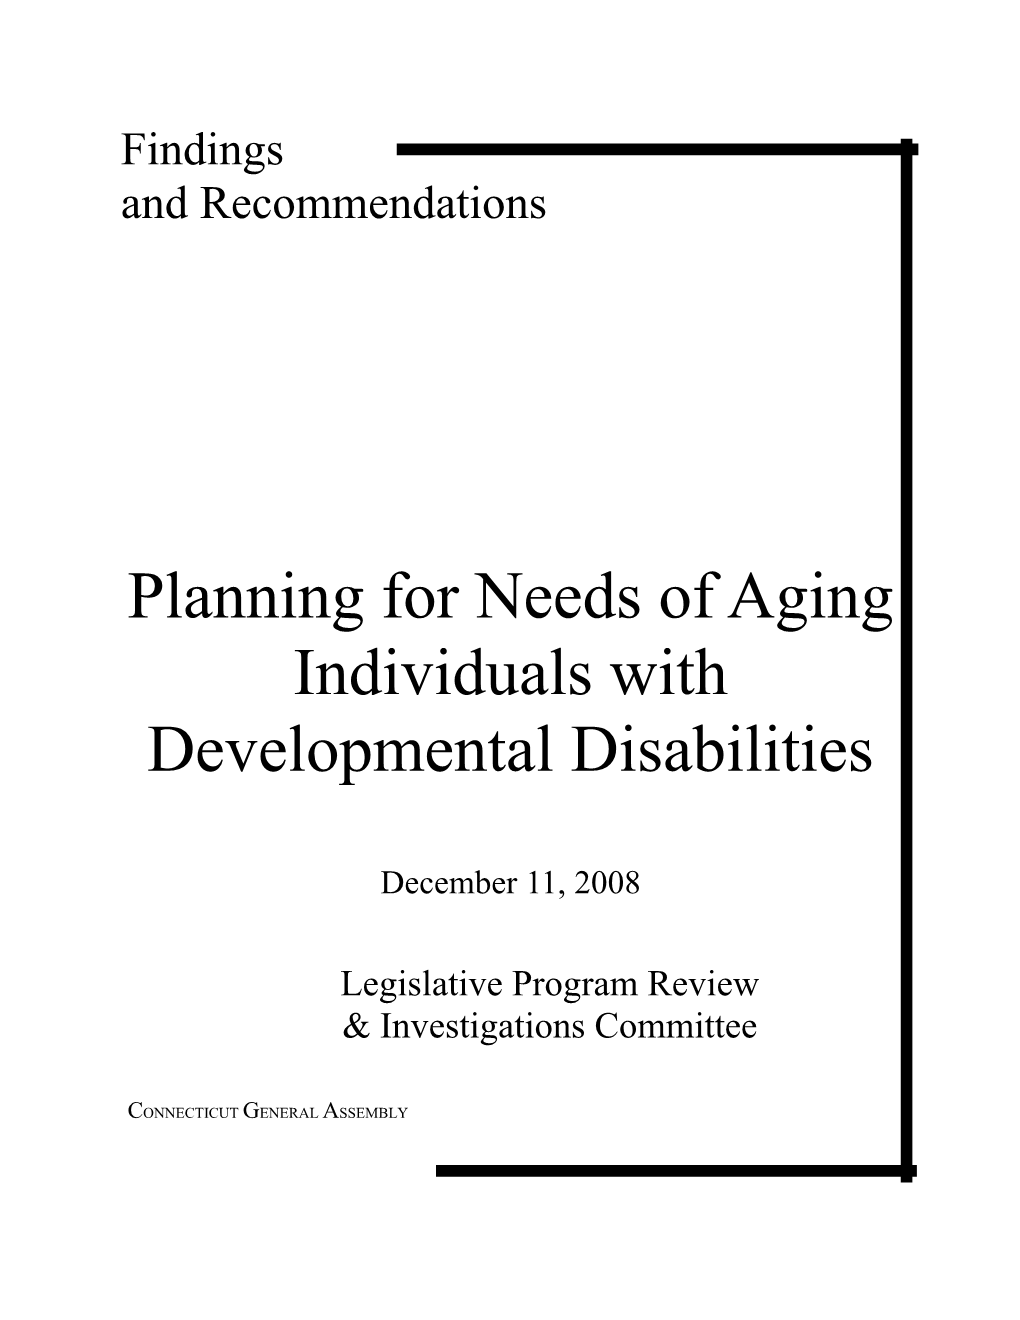 Planning for Needs of Aging Individuals with Developmental Disabilities